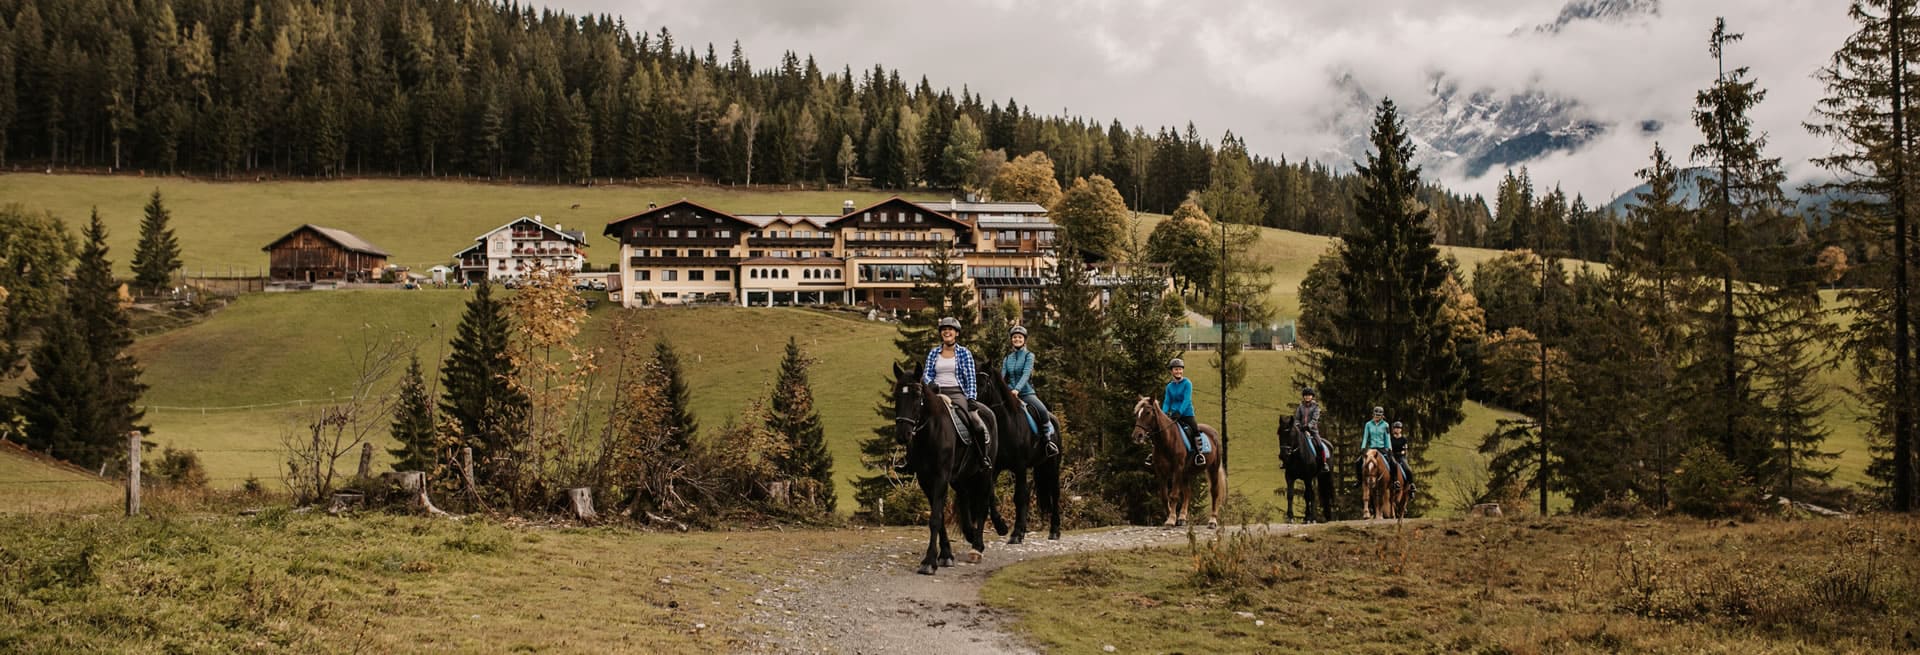 Horse riding holiday with the family at the 4-star Hotel Neubergerhof in Filzmoos